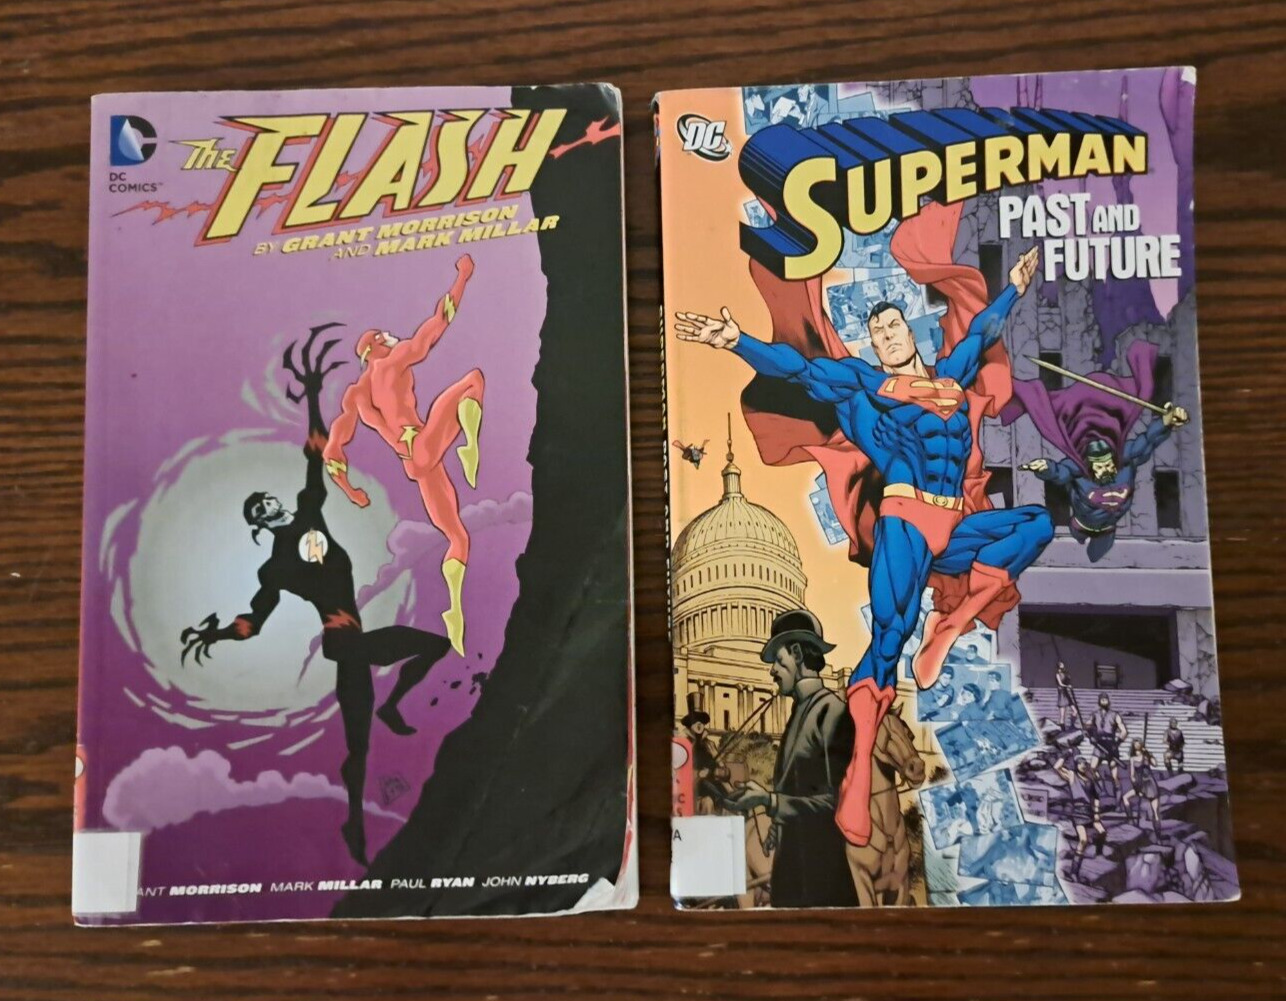 The Flash by Grant Morrison and Mark Millar, Superman Past and Future, DC Comics